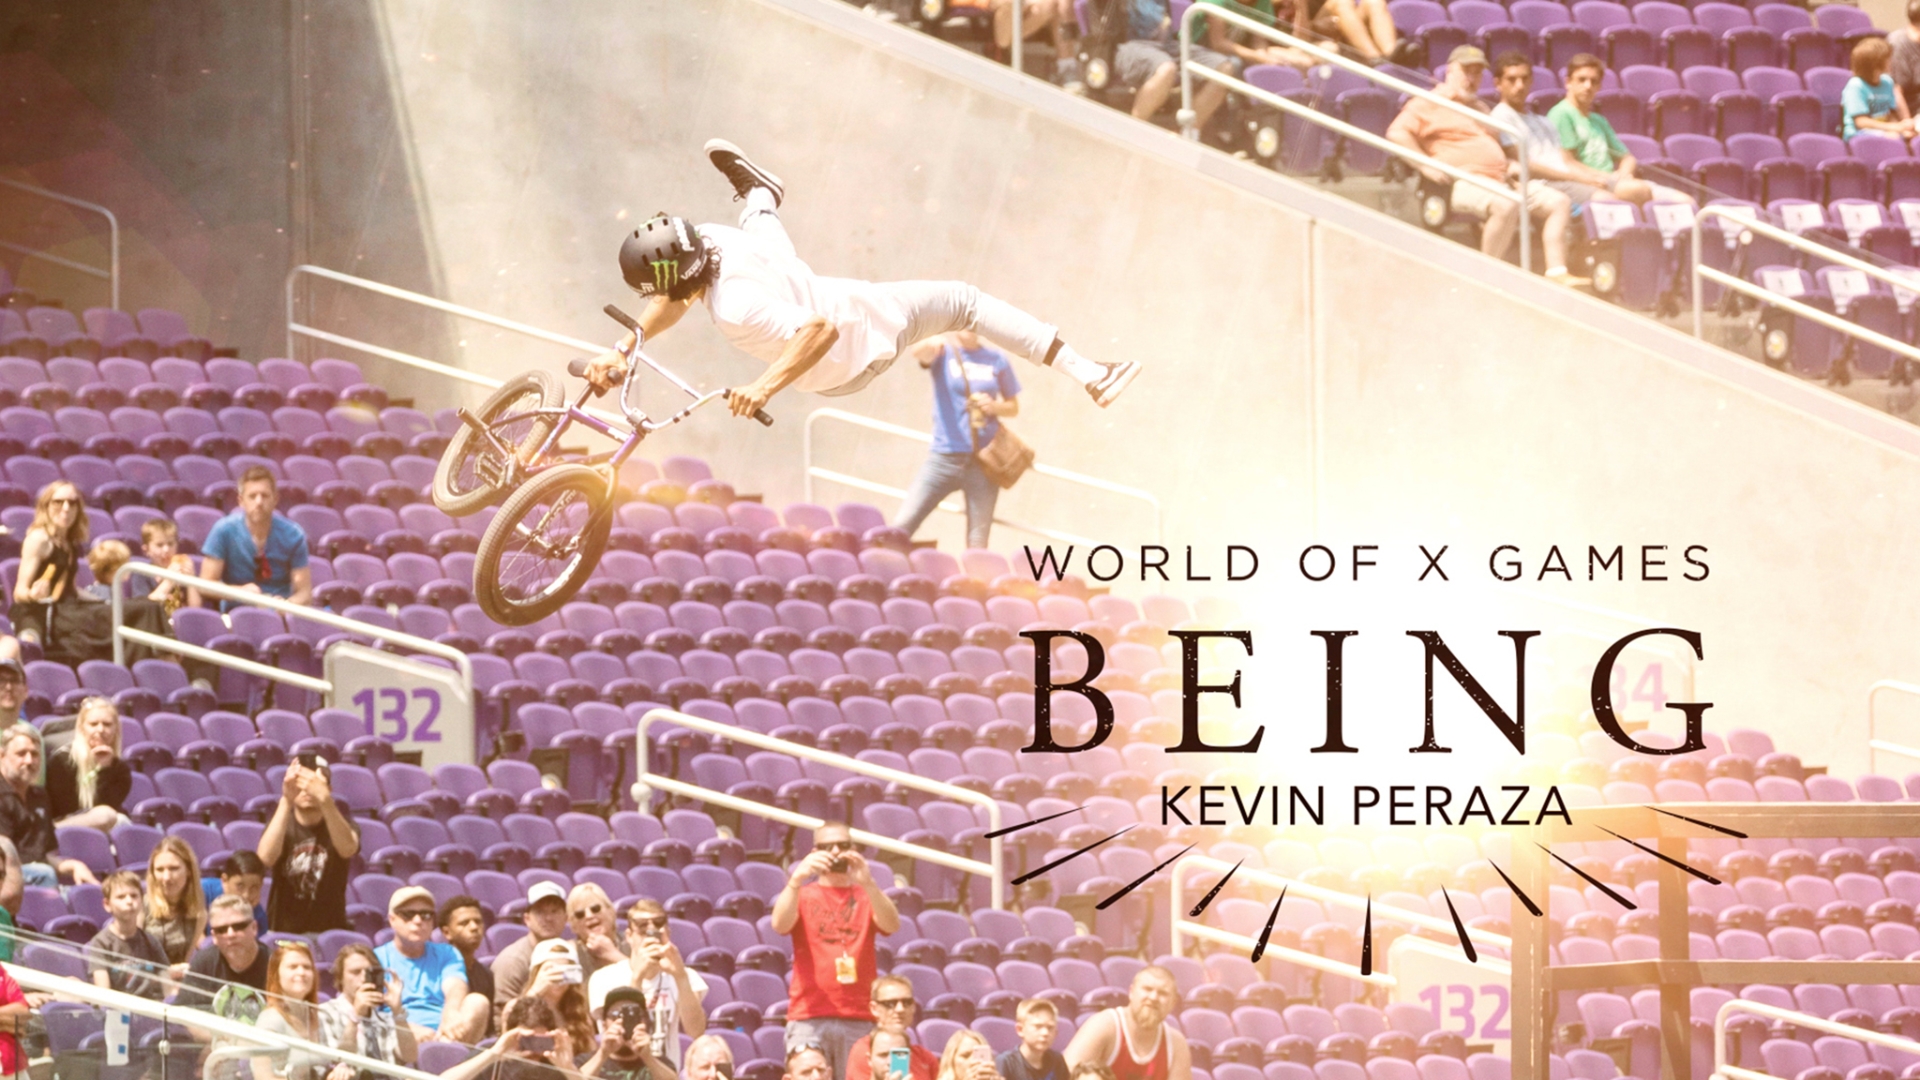 Being: Kevin Peraza